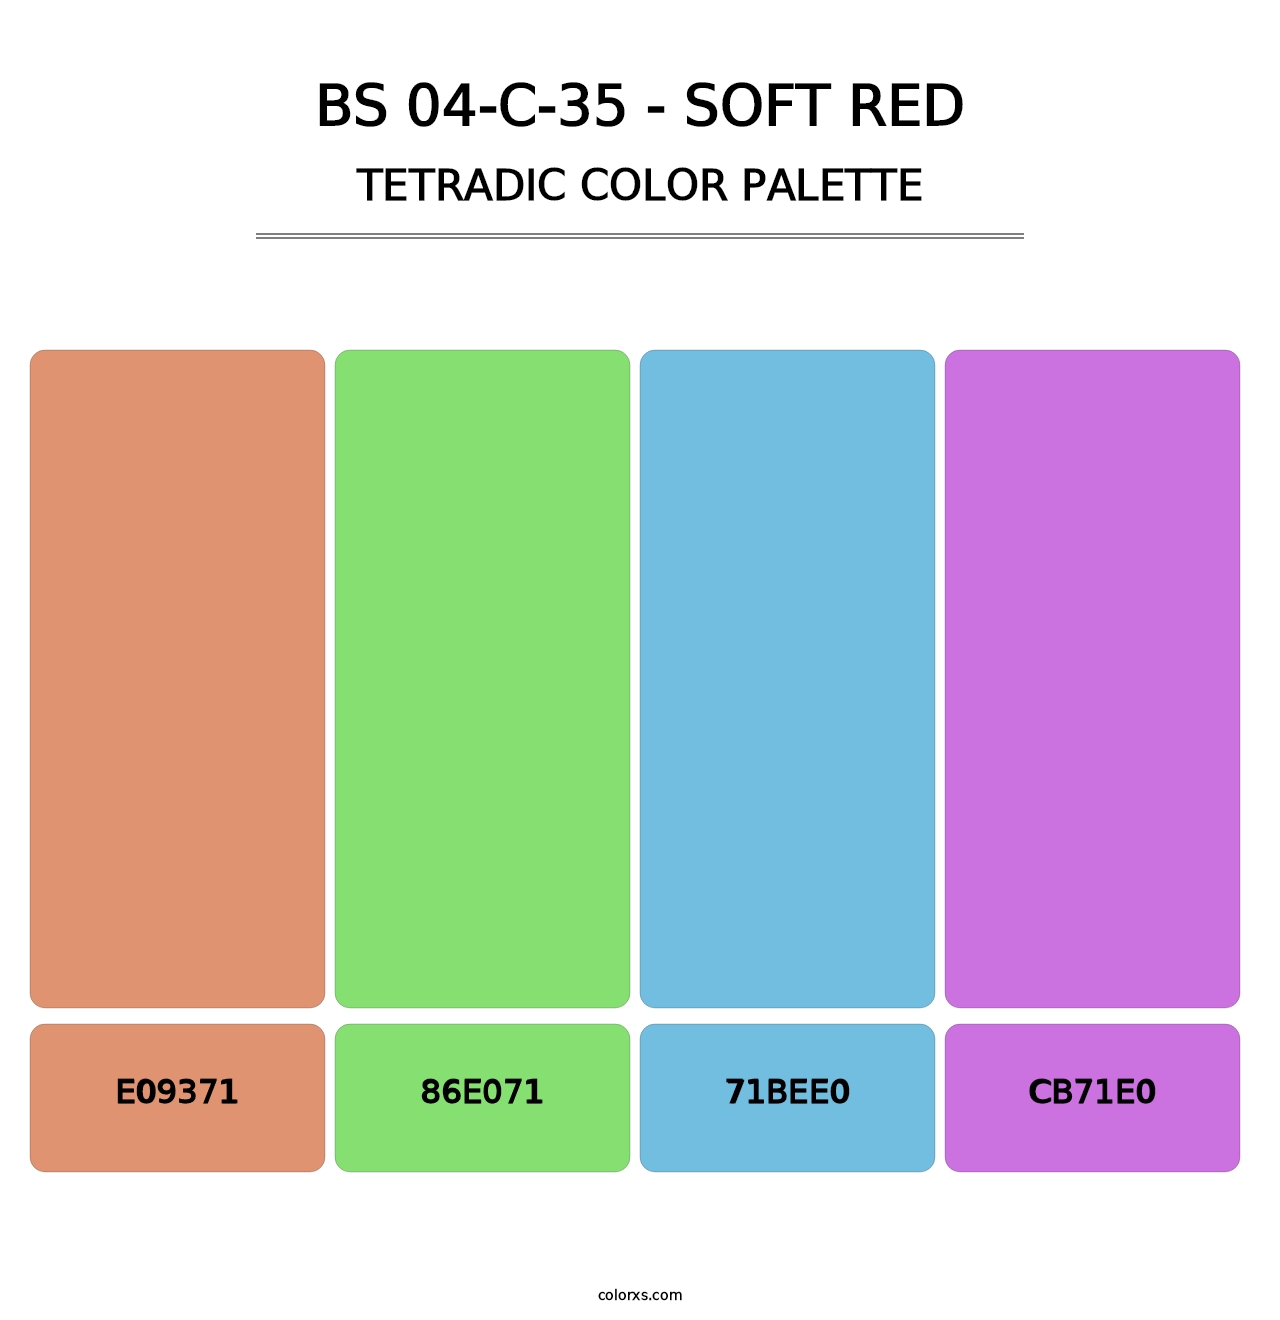 BS 04-C-35 - Soft Red - Tetradic Color Palette